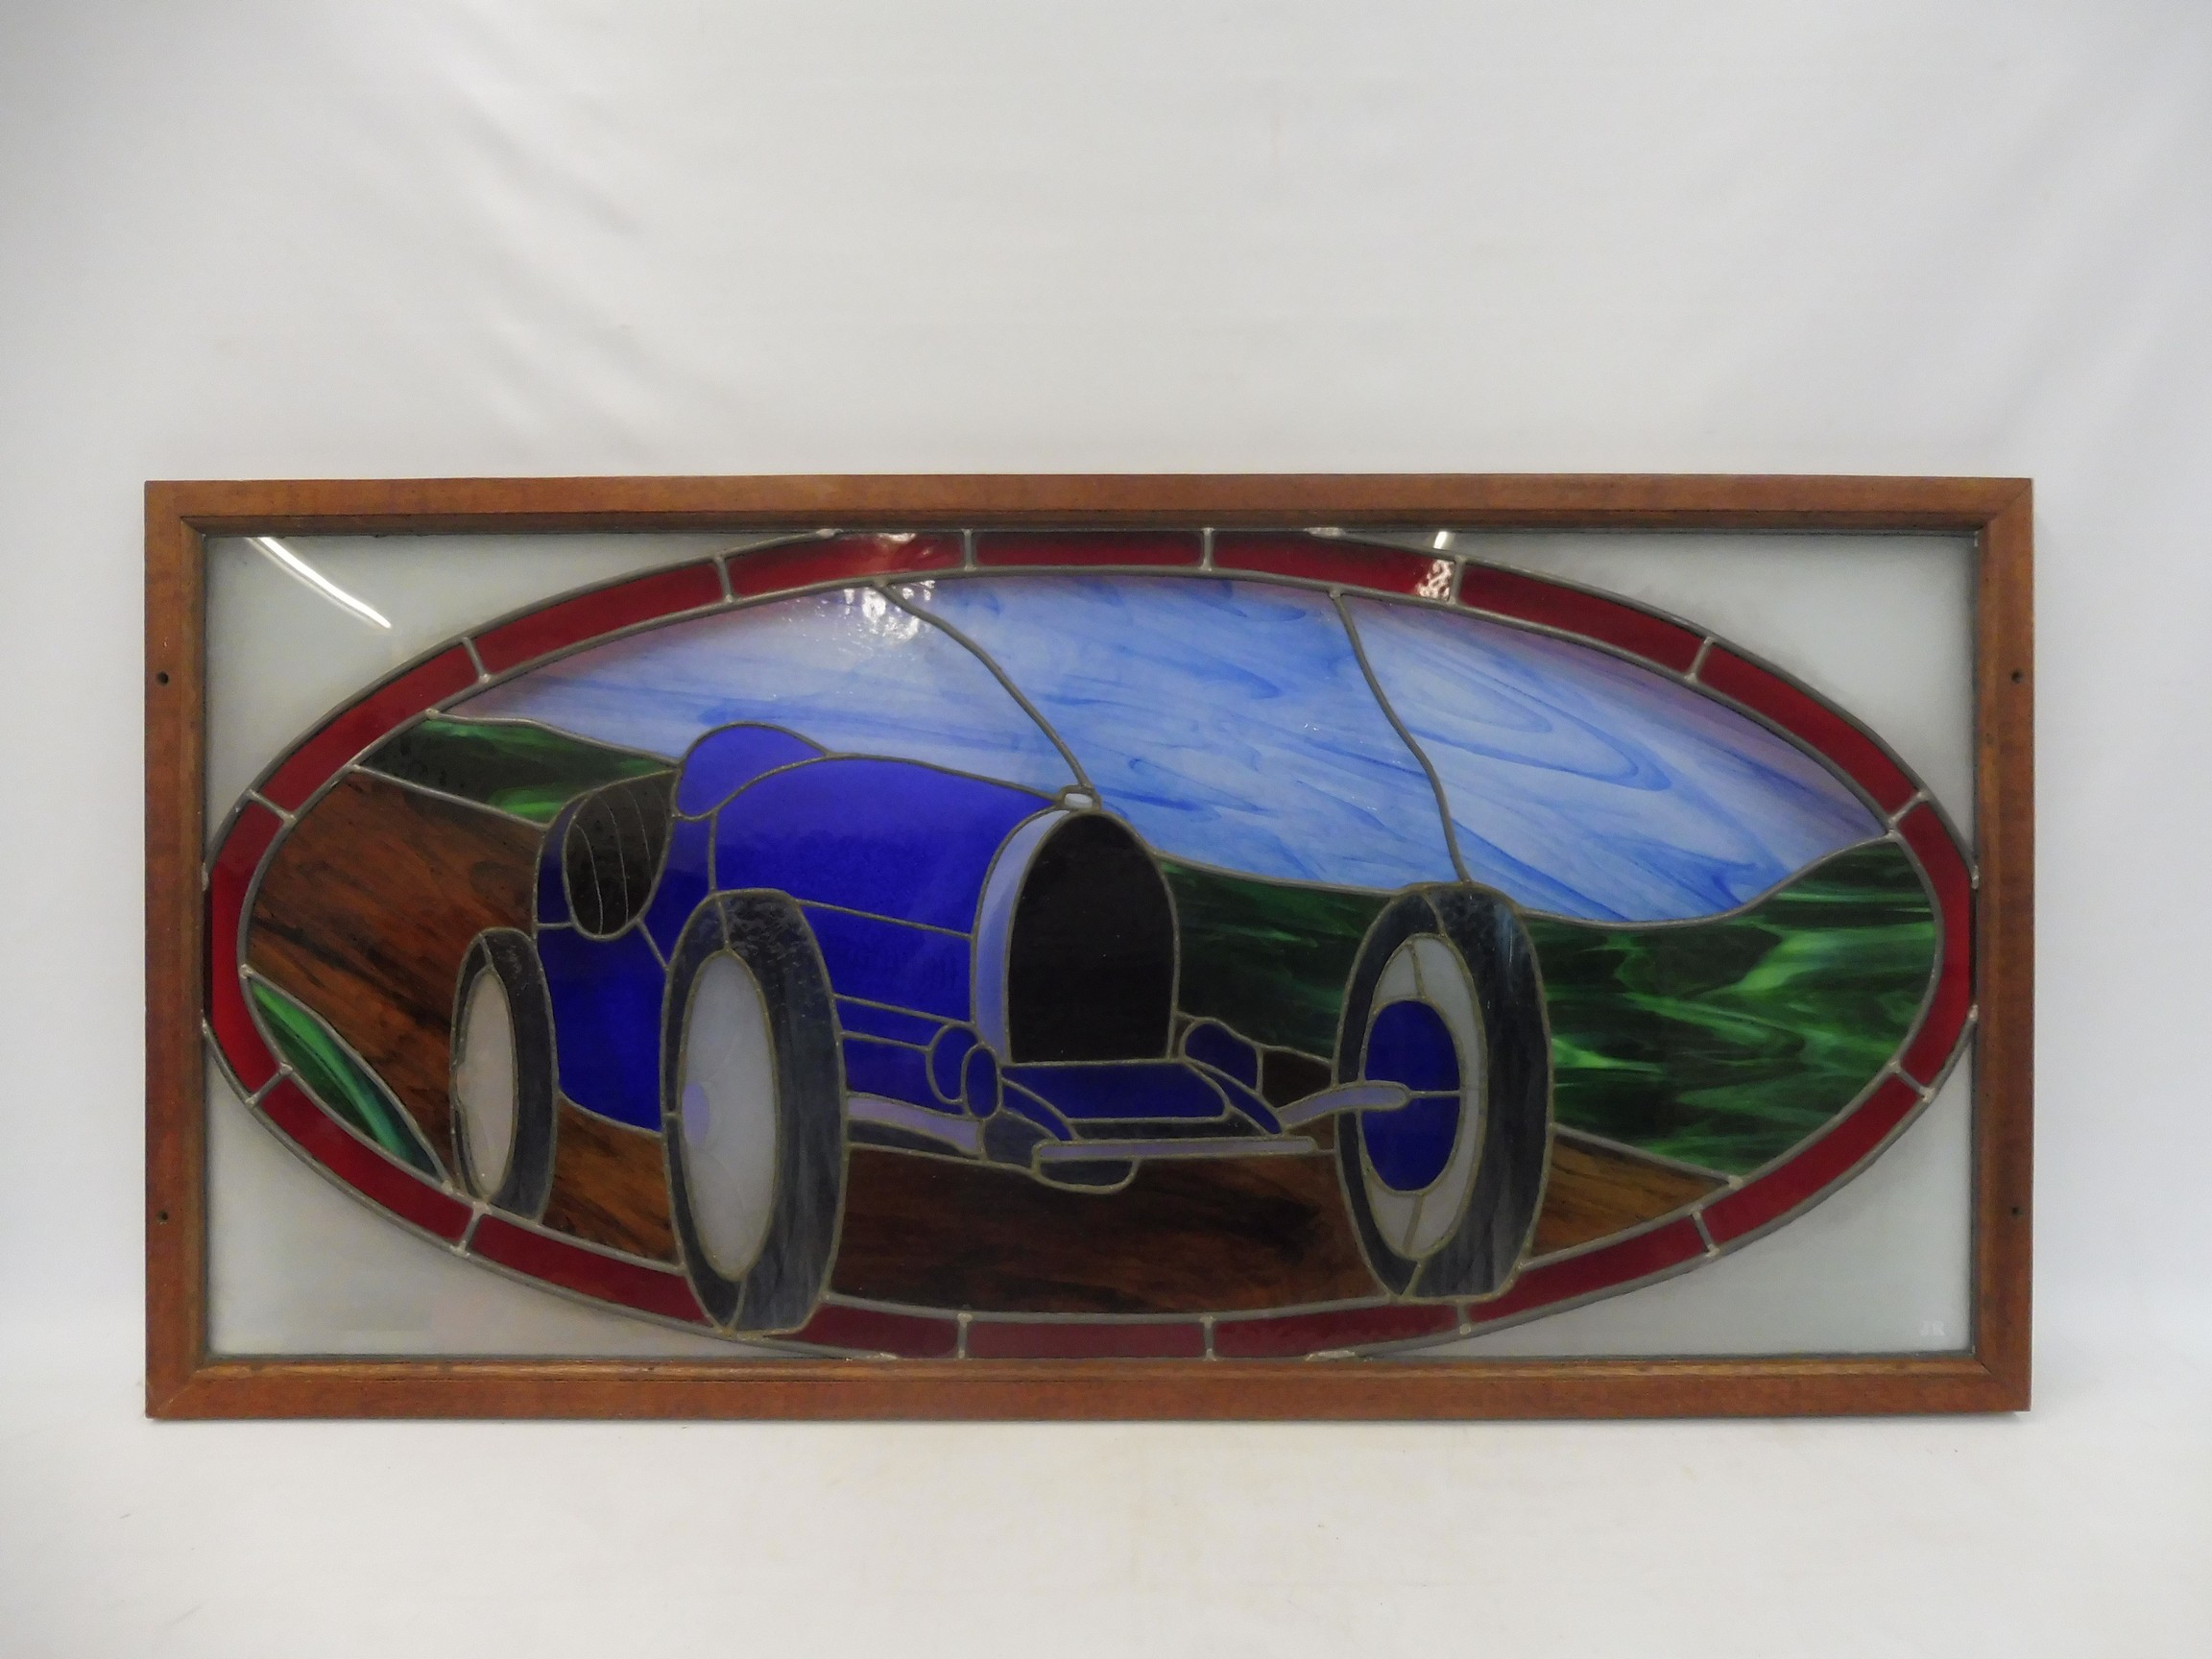 J. RAINEY - a stained glass panel showing a Bugatti Type 35, in a wooden frame, 47 1/2 x 23 1/2".